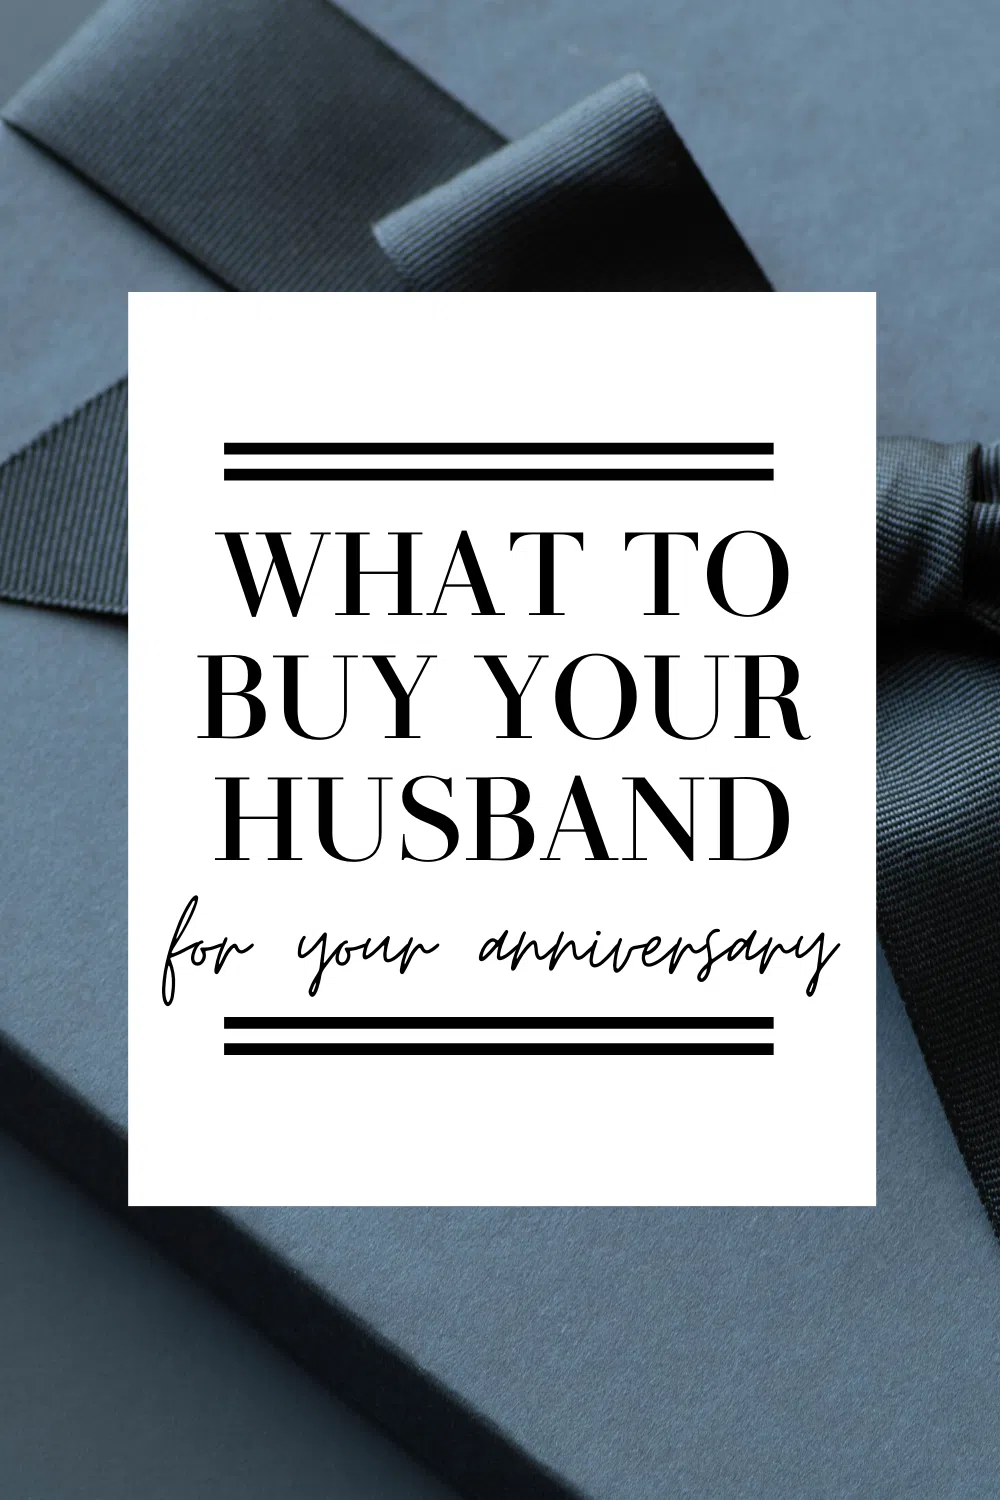 what to buy your husband for your anniversary